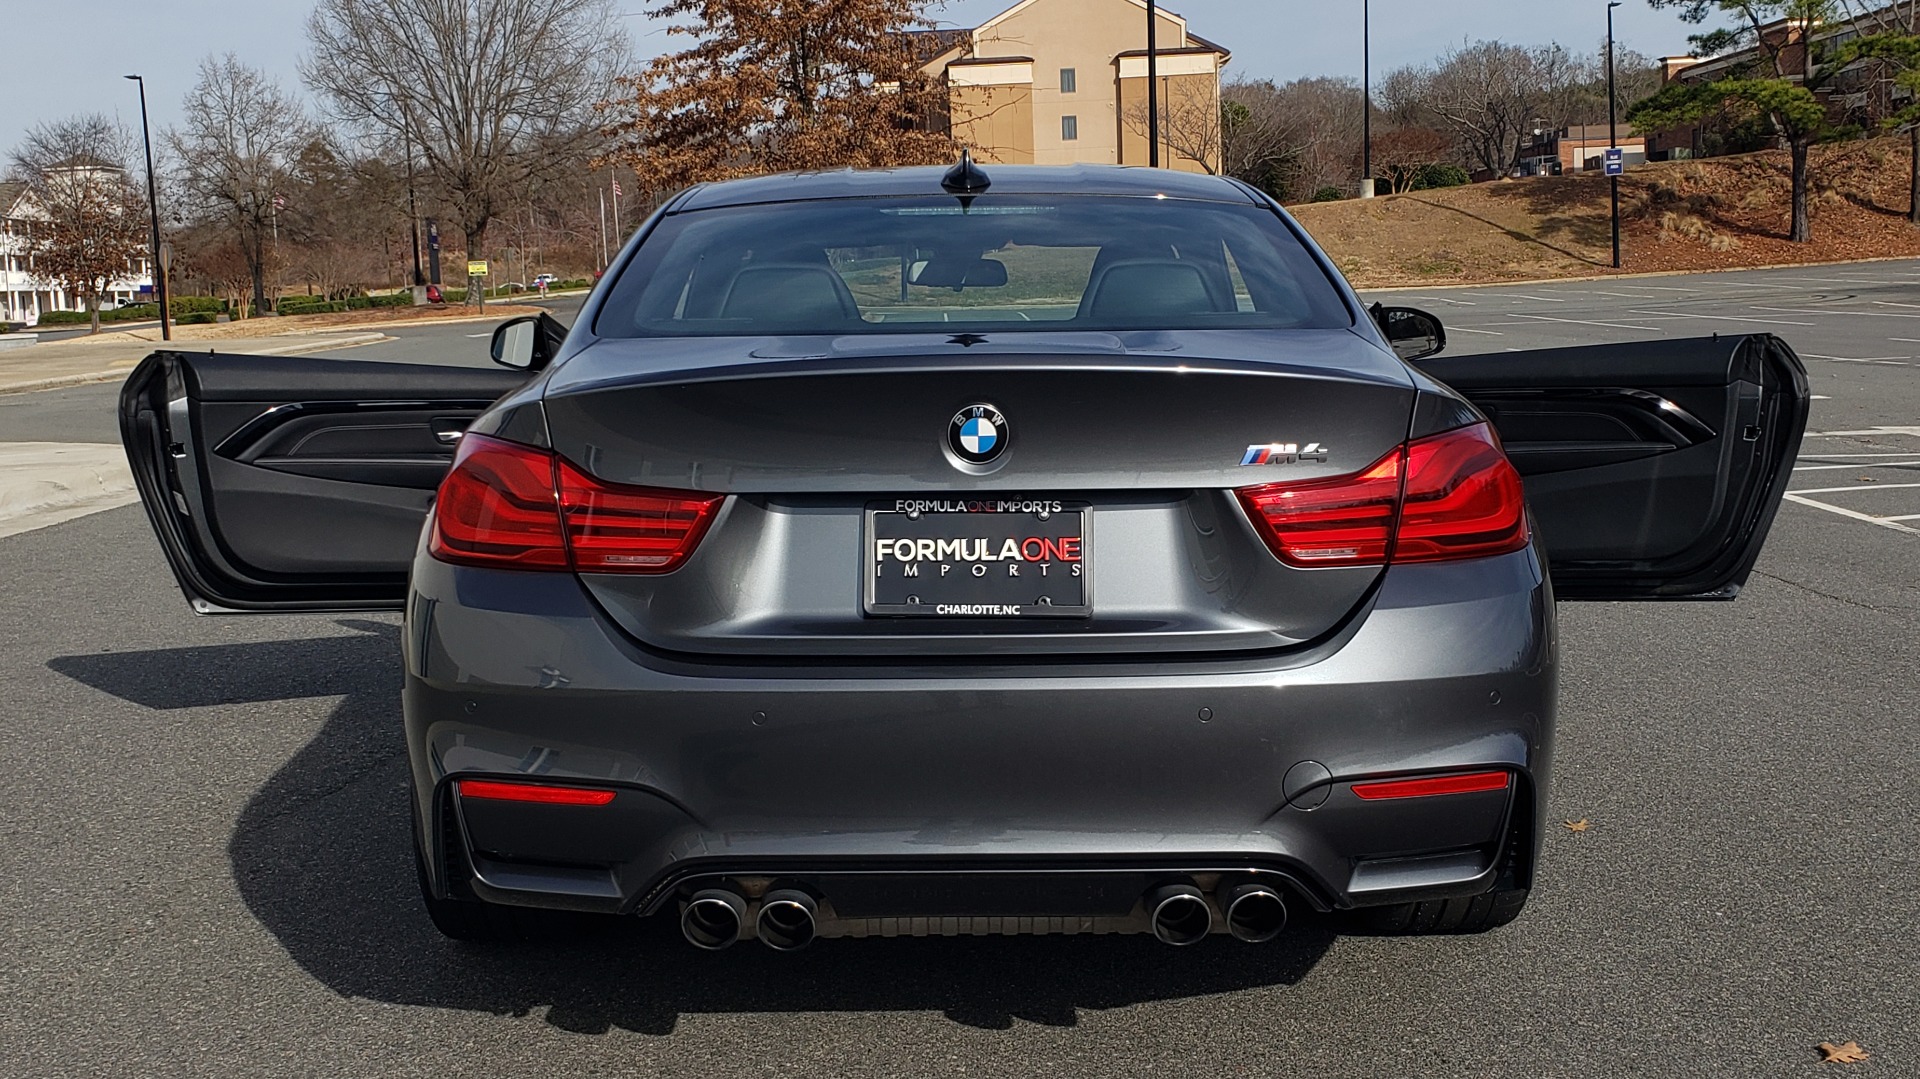 Used 2019 BMW M4 COUPE 3.0L 425HP / 7-SPD AUTO / NAV / 19-IN WHEELS / REARVIEW for sale $67,999 at Formula Imports in Charlotte NC 28227 29